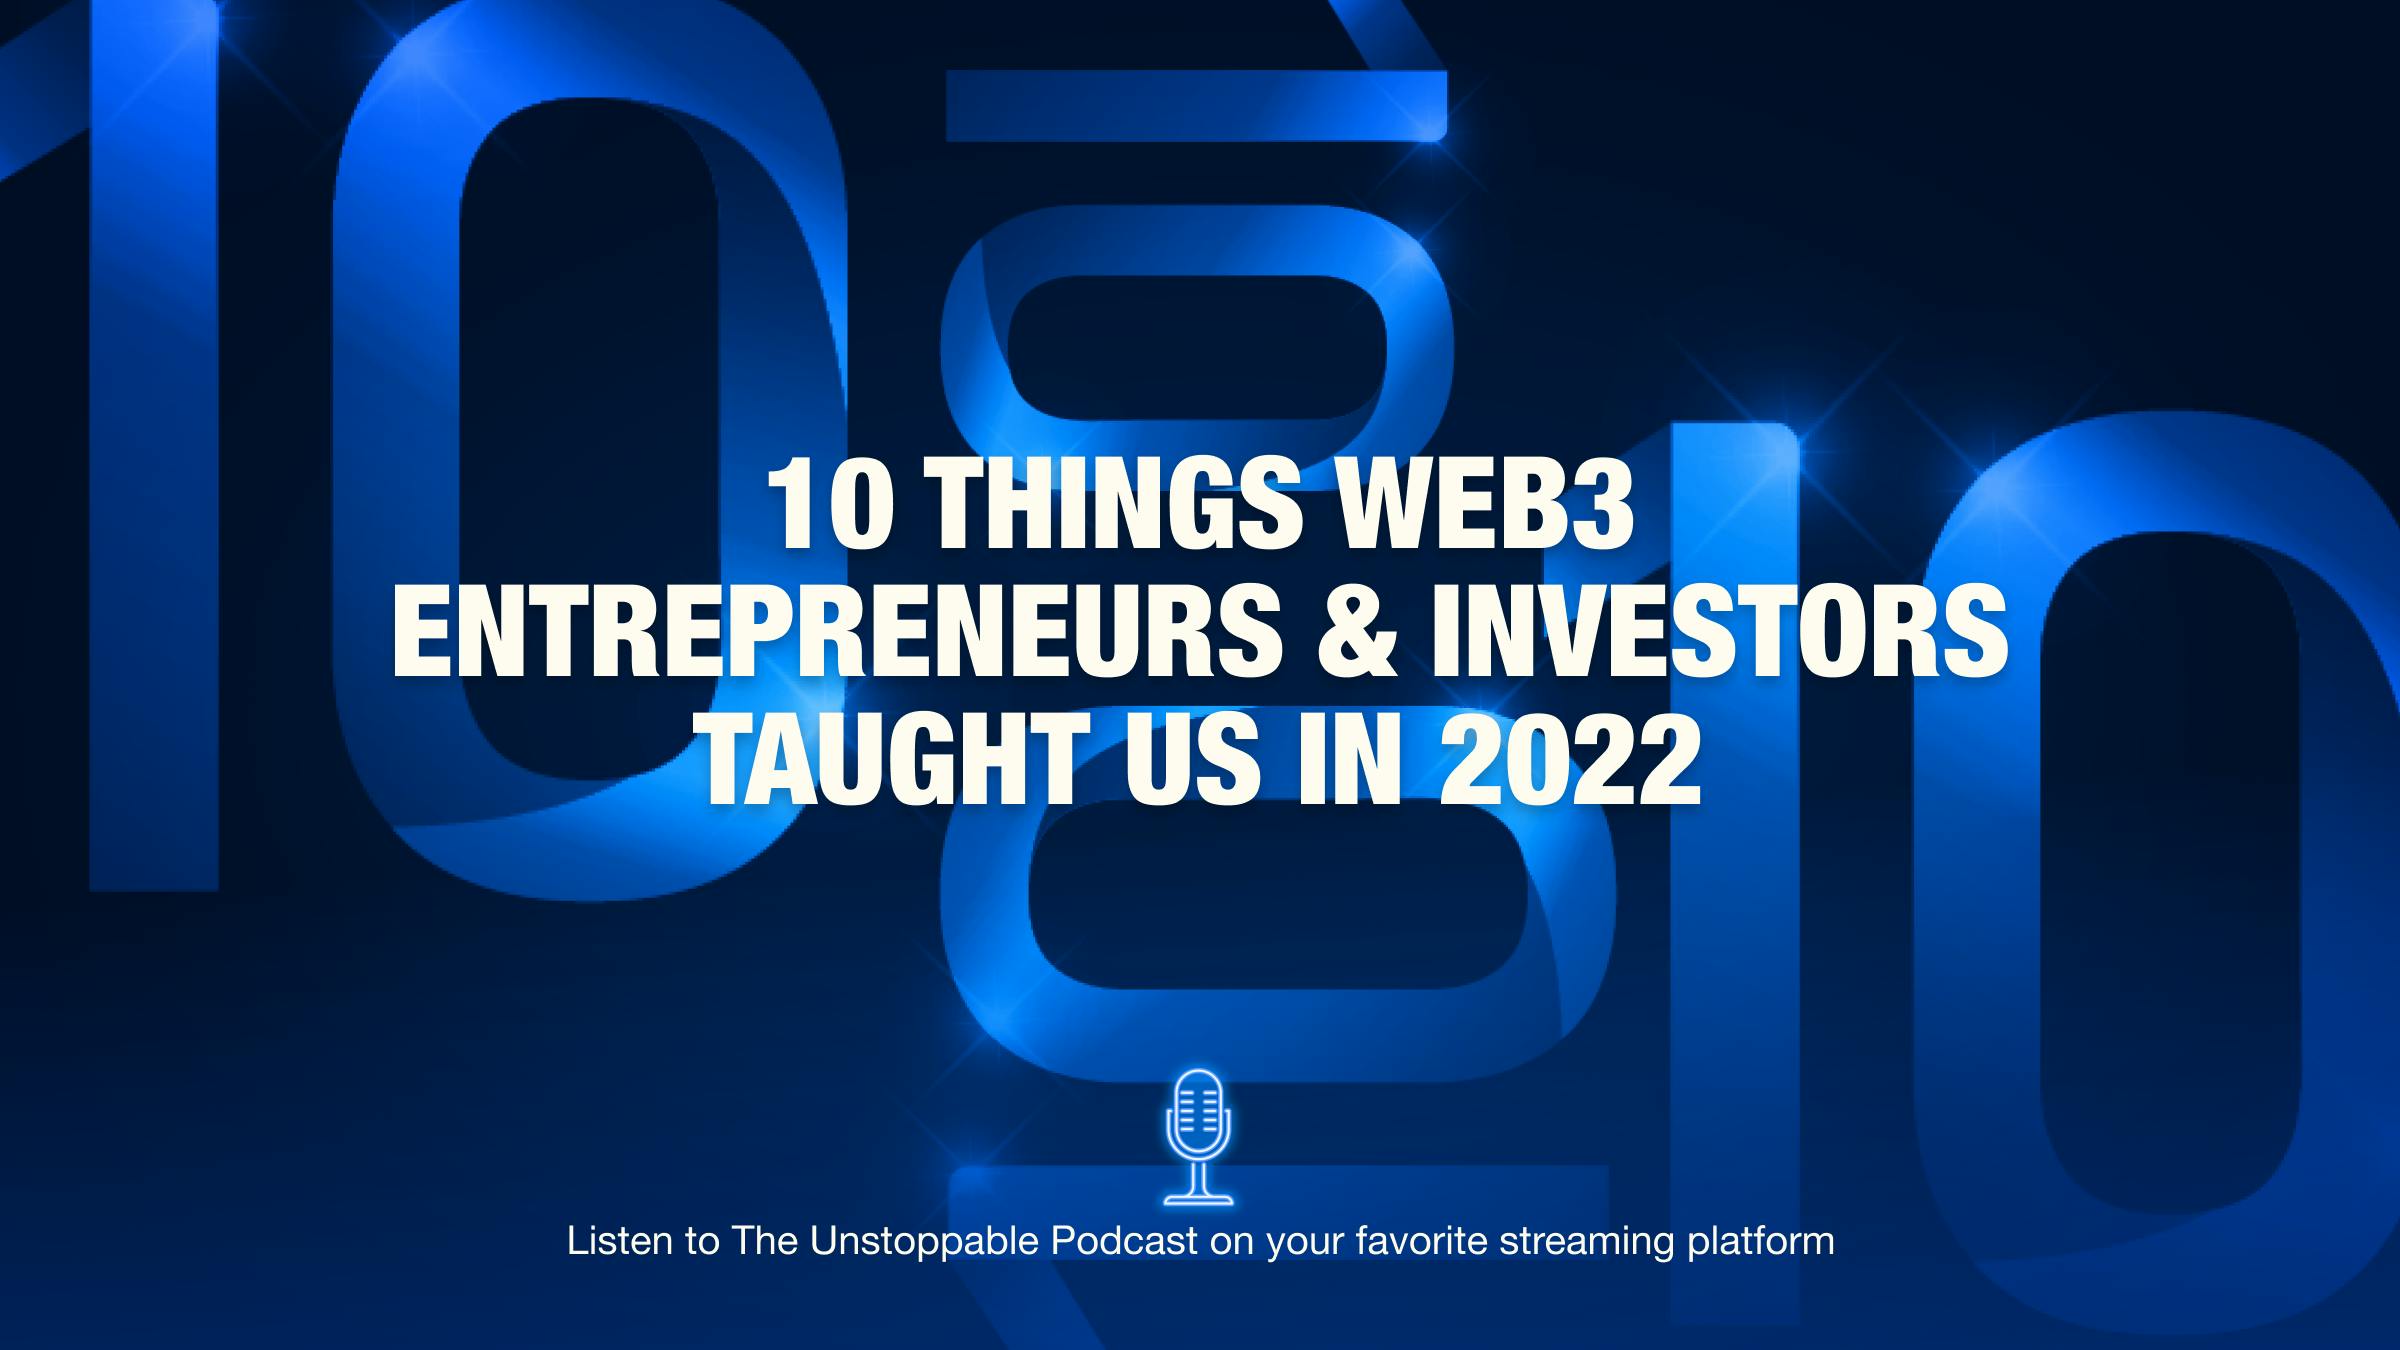 10 Things Web3 Entrepreneurs and Investors Taught Us In 2022